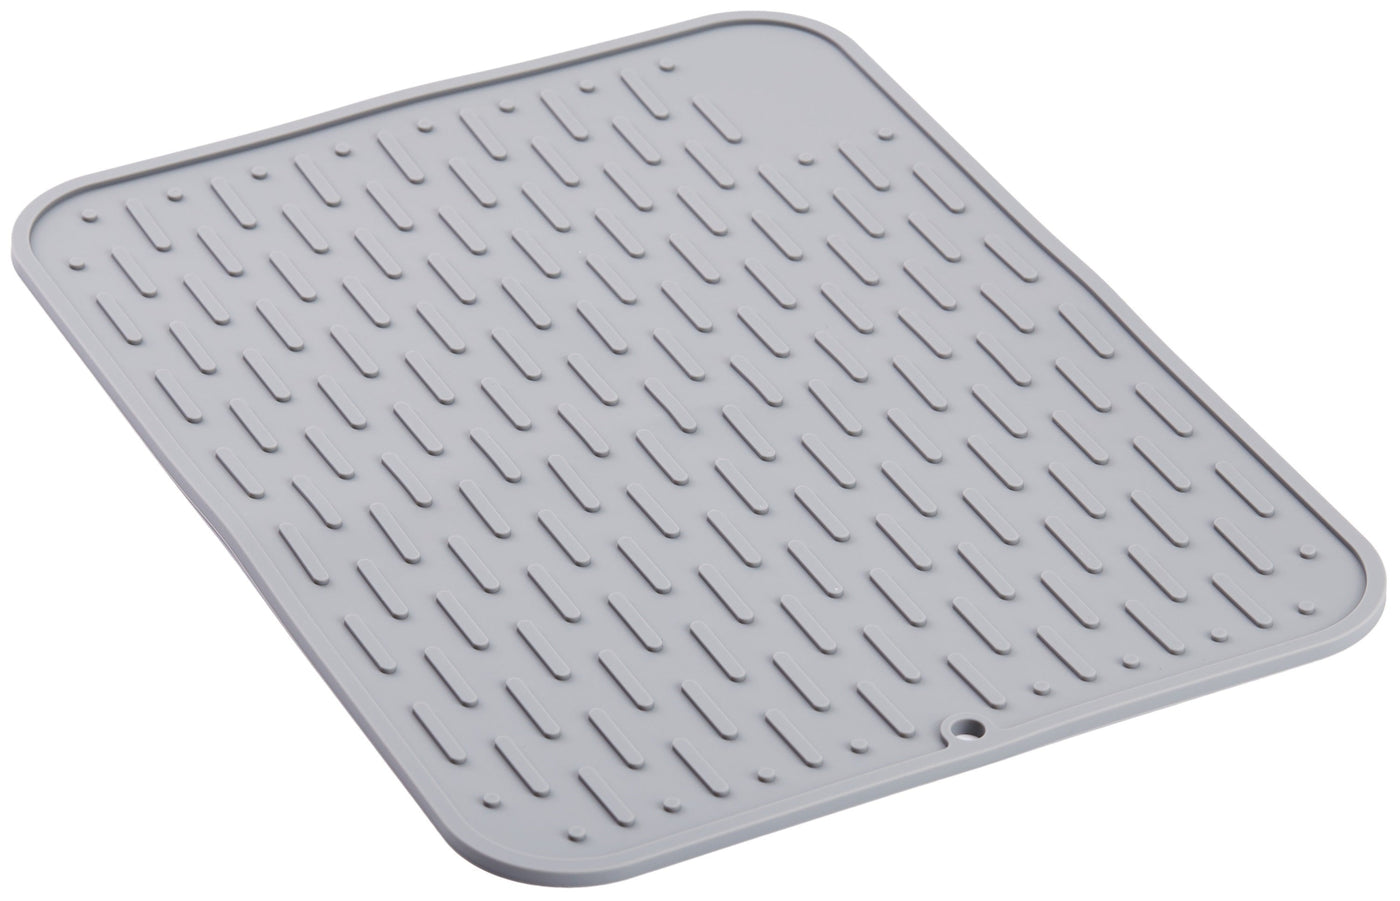 Dish Drying Pad, Drying Mat for Kitchen Counter